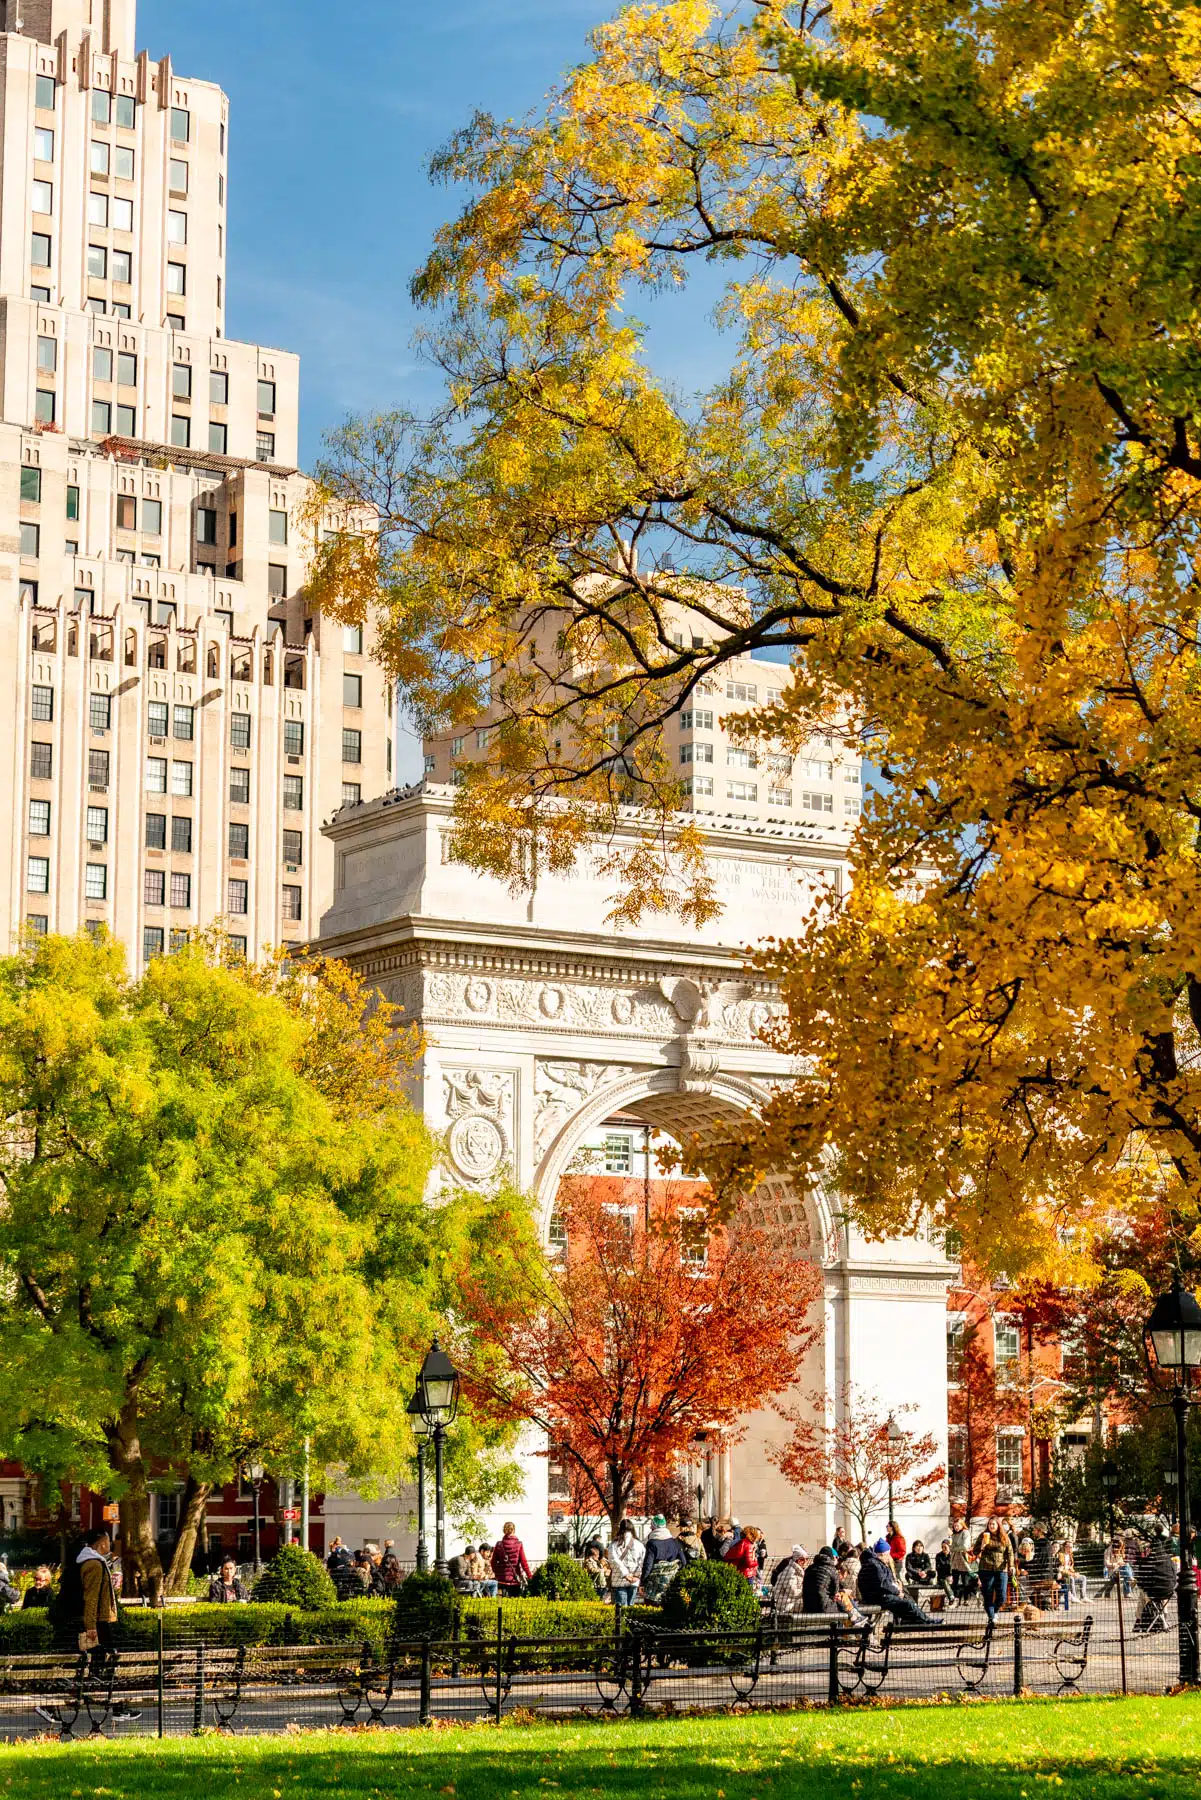 Washington Square Park 
Most Popular NYC attractions